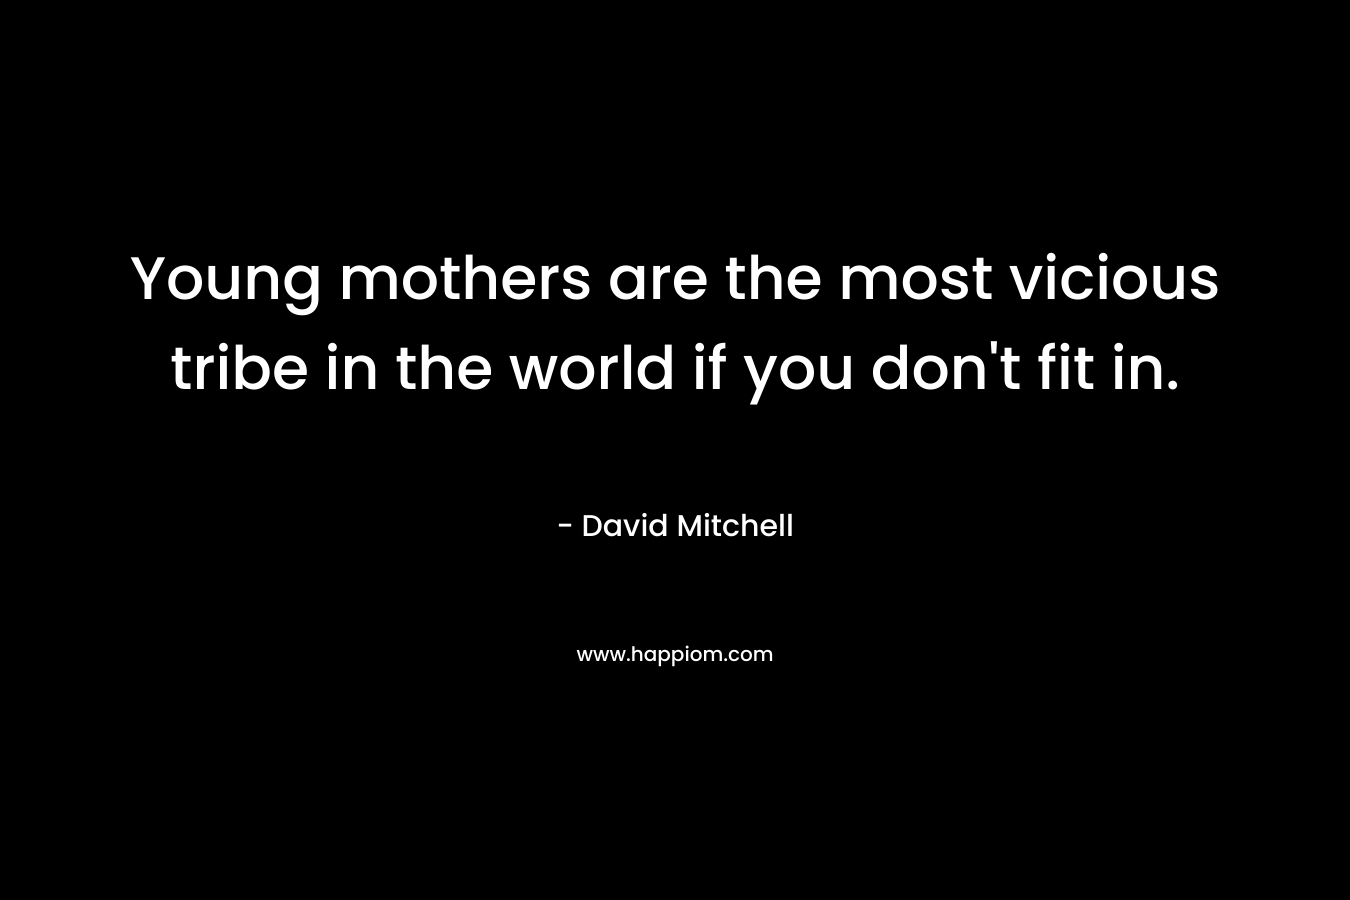 Young mothers are the most vicious tribe in the world if you don’t fit in. – David Mitchell